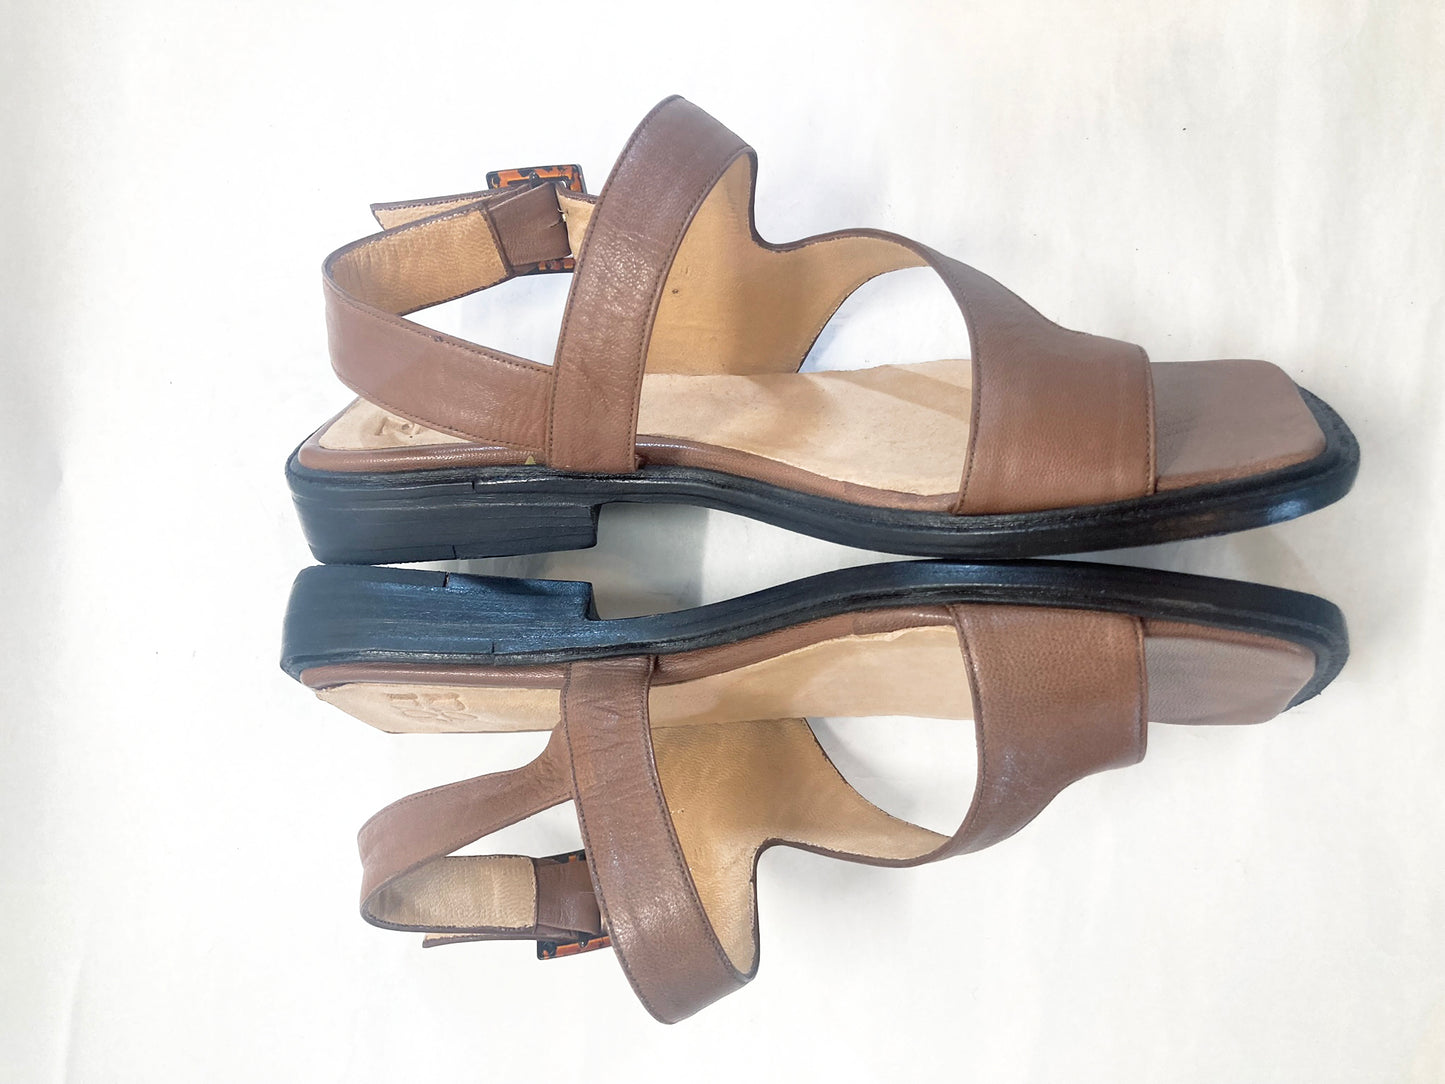 Anto Sandal in Chocolate Size 37